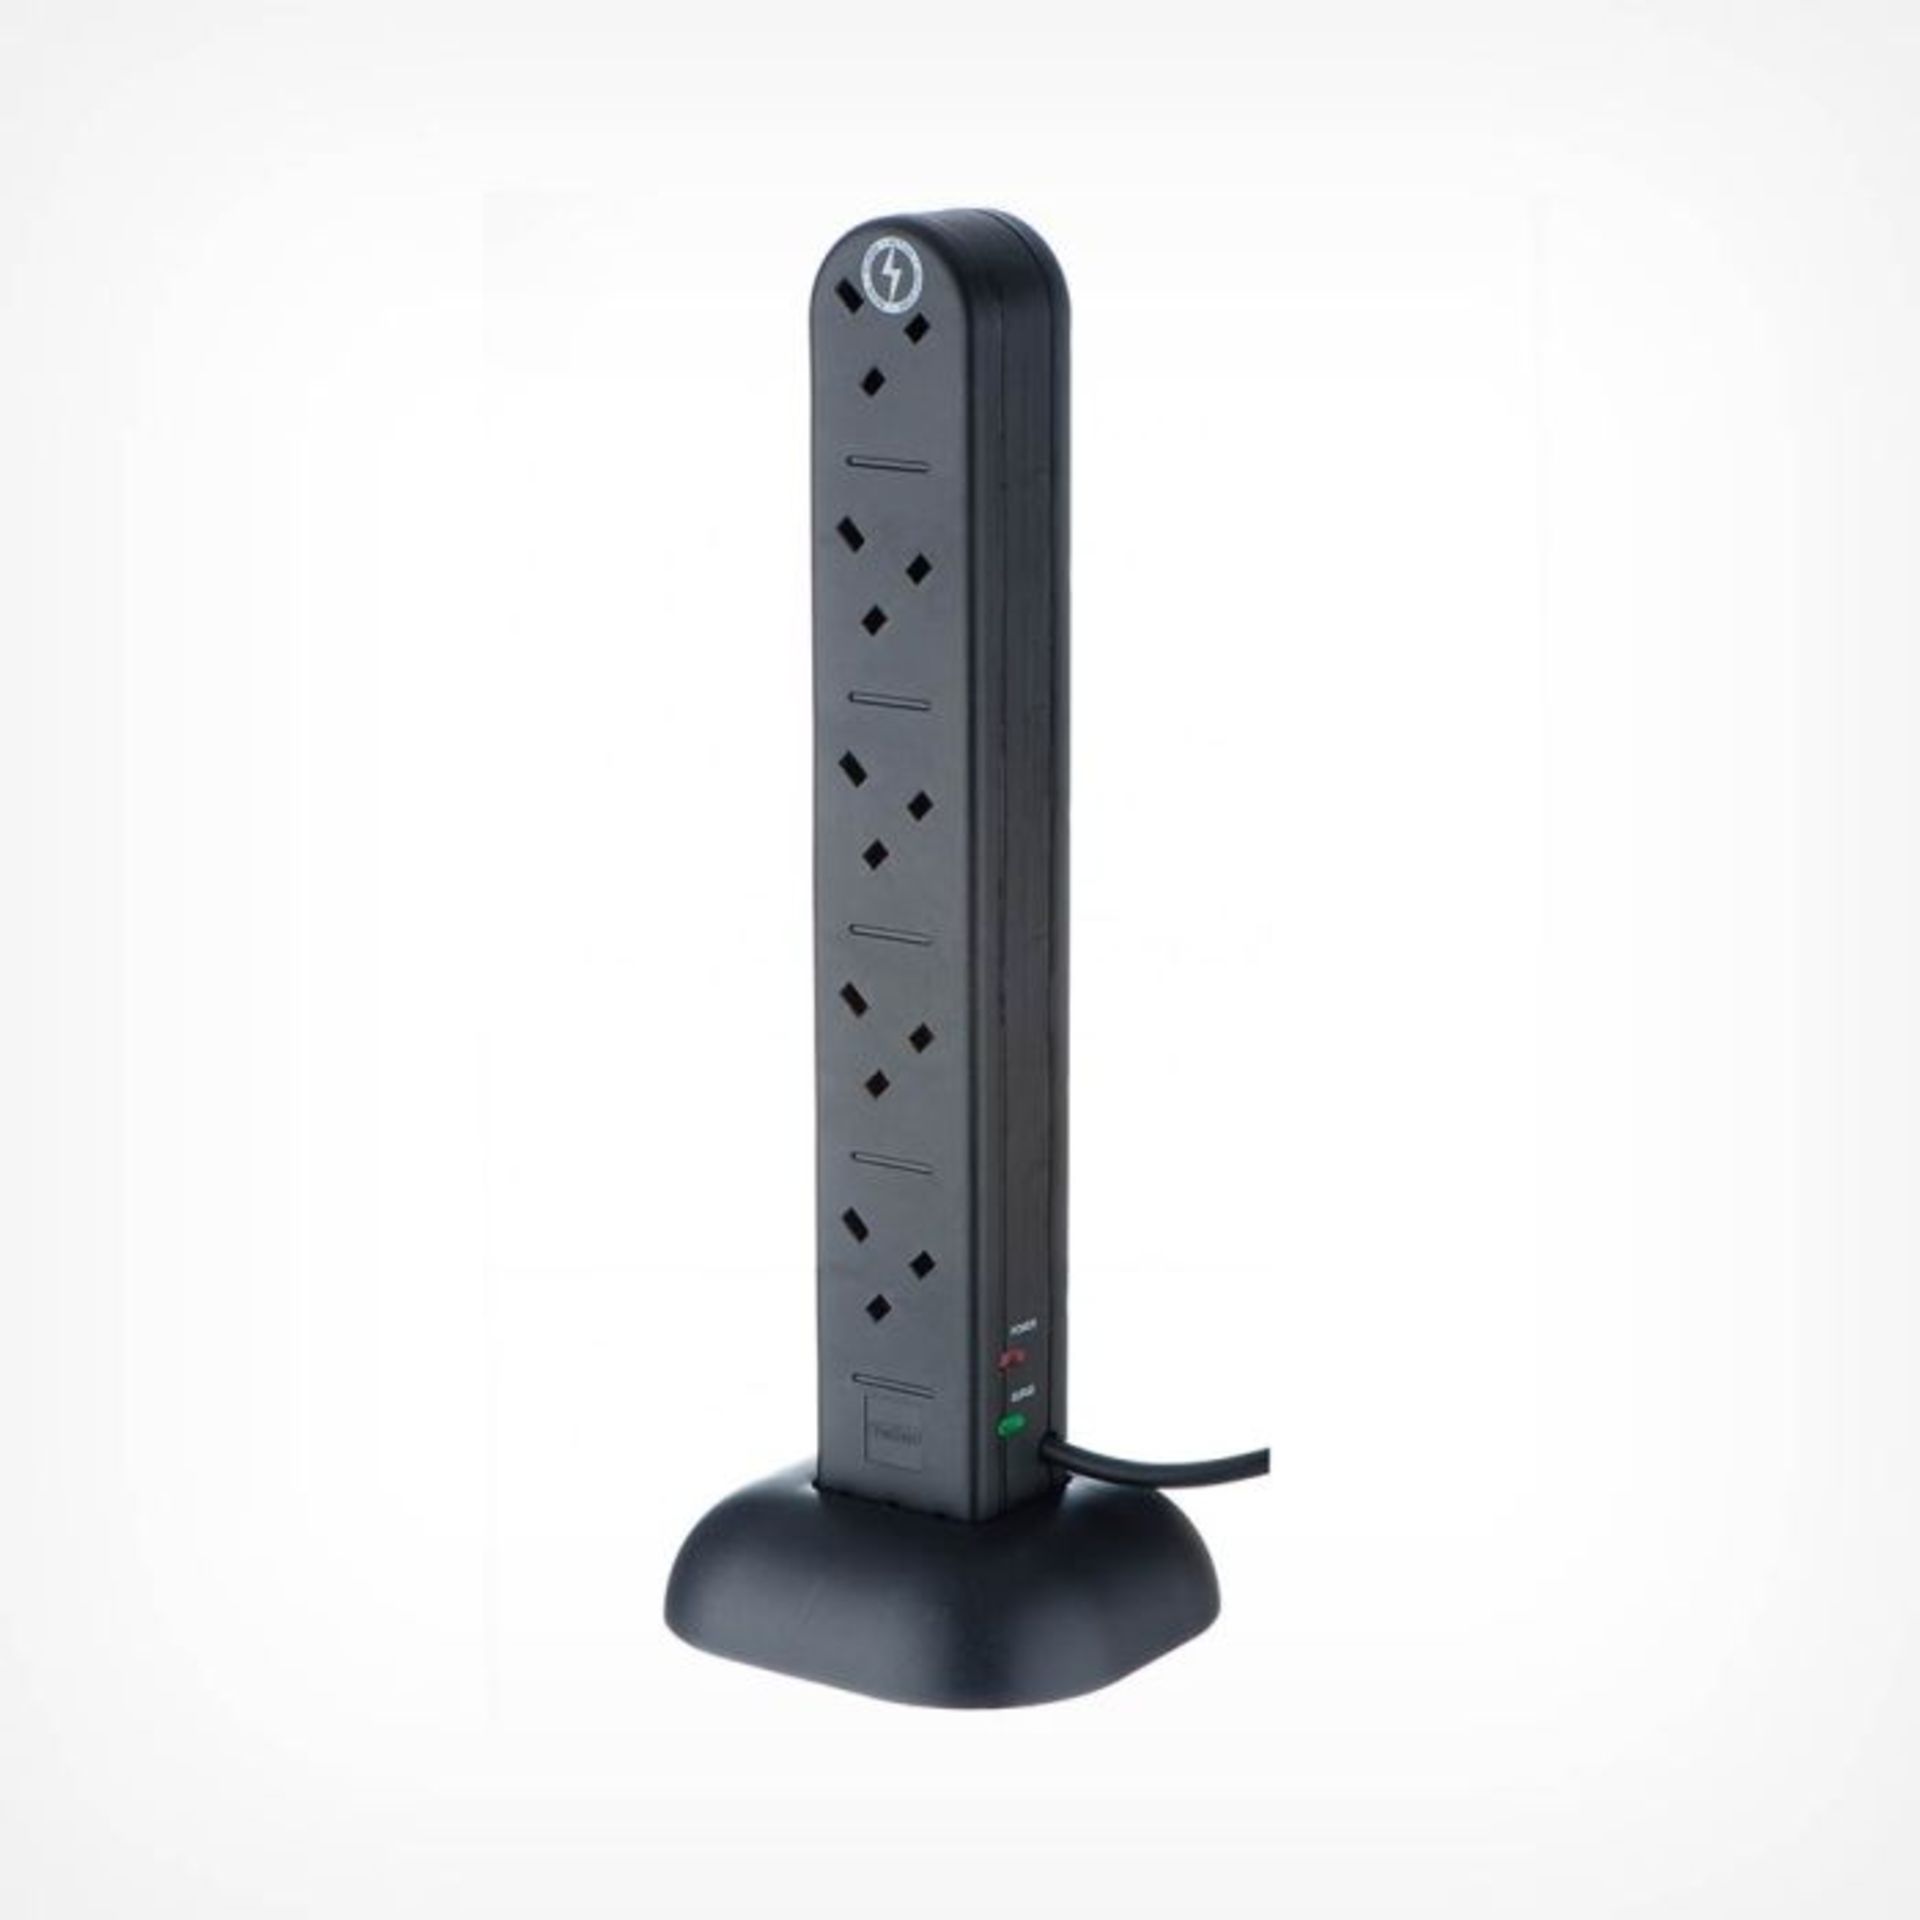 10 Socket Tower - Black. - ER36. The VonHaus Tower Socket is a sensible choice for home office